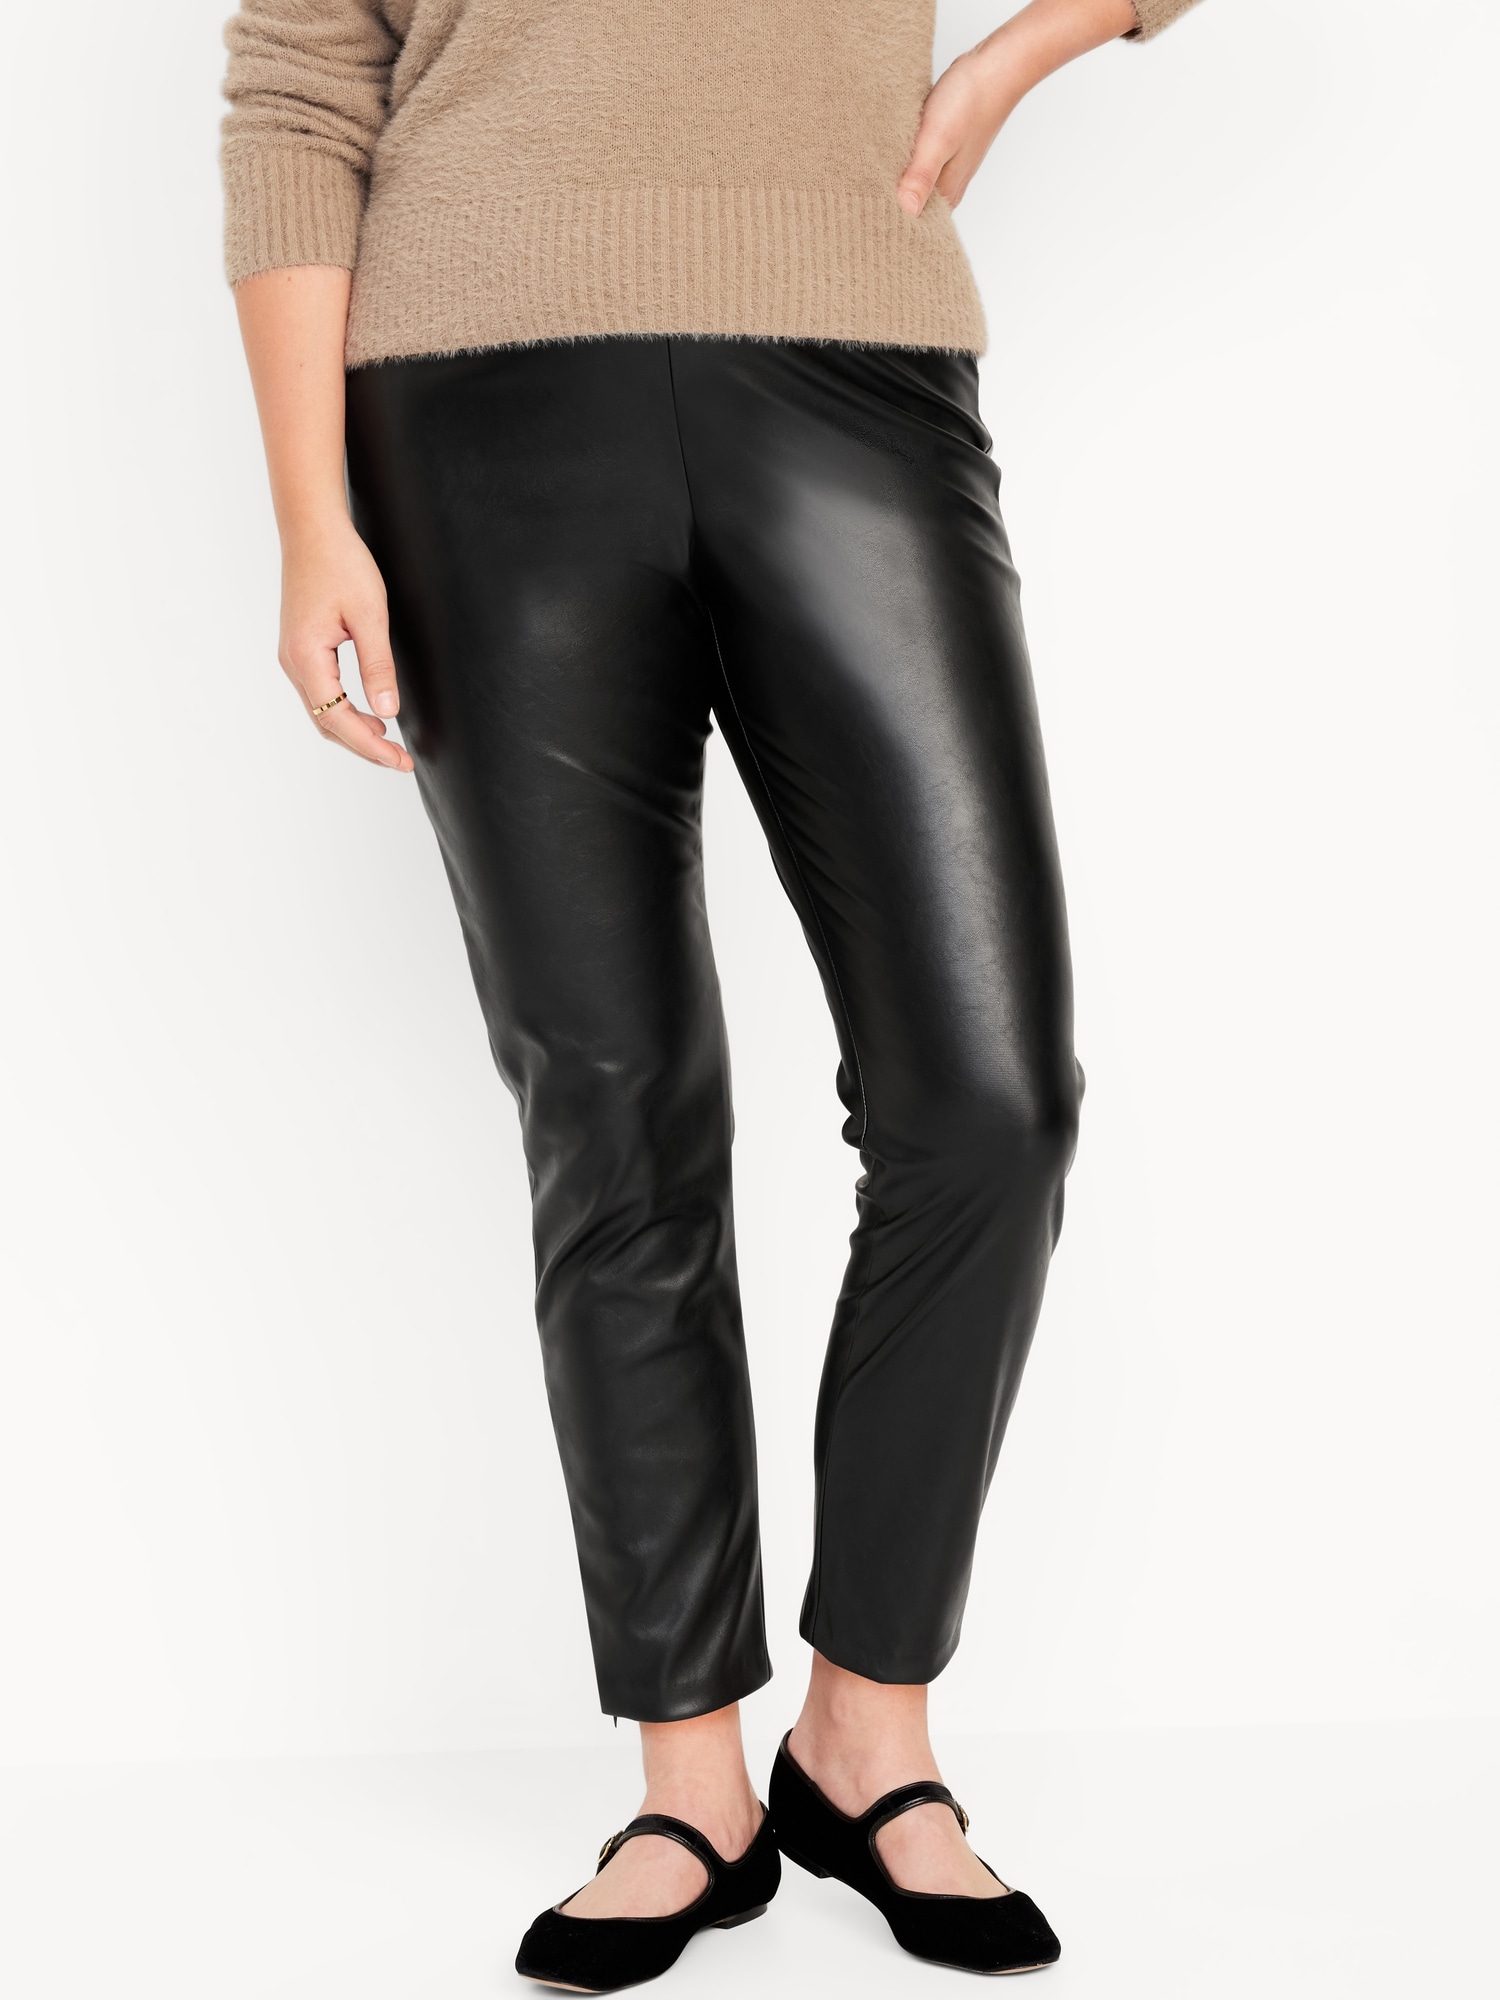 th products / Synthetic Leather Pants